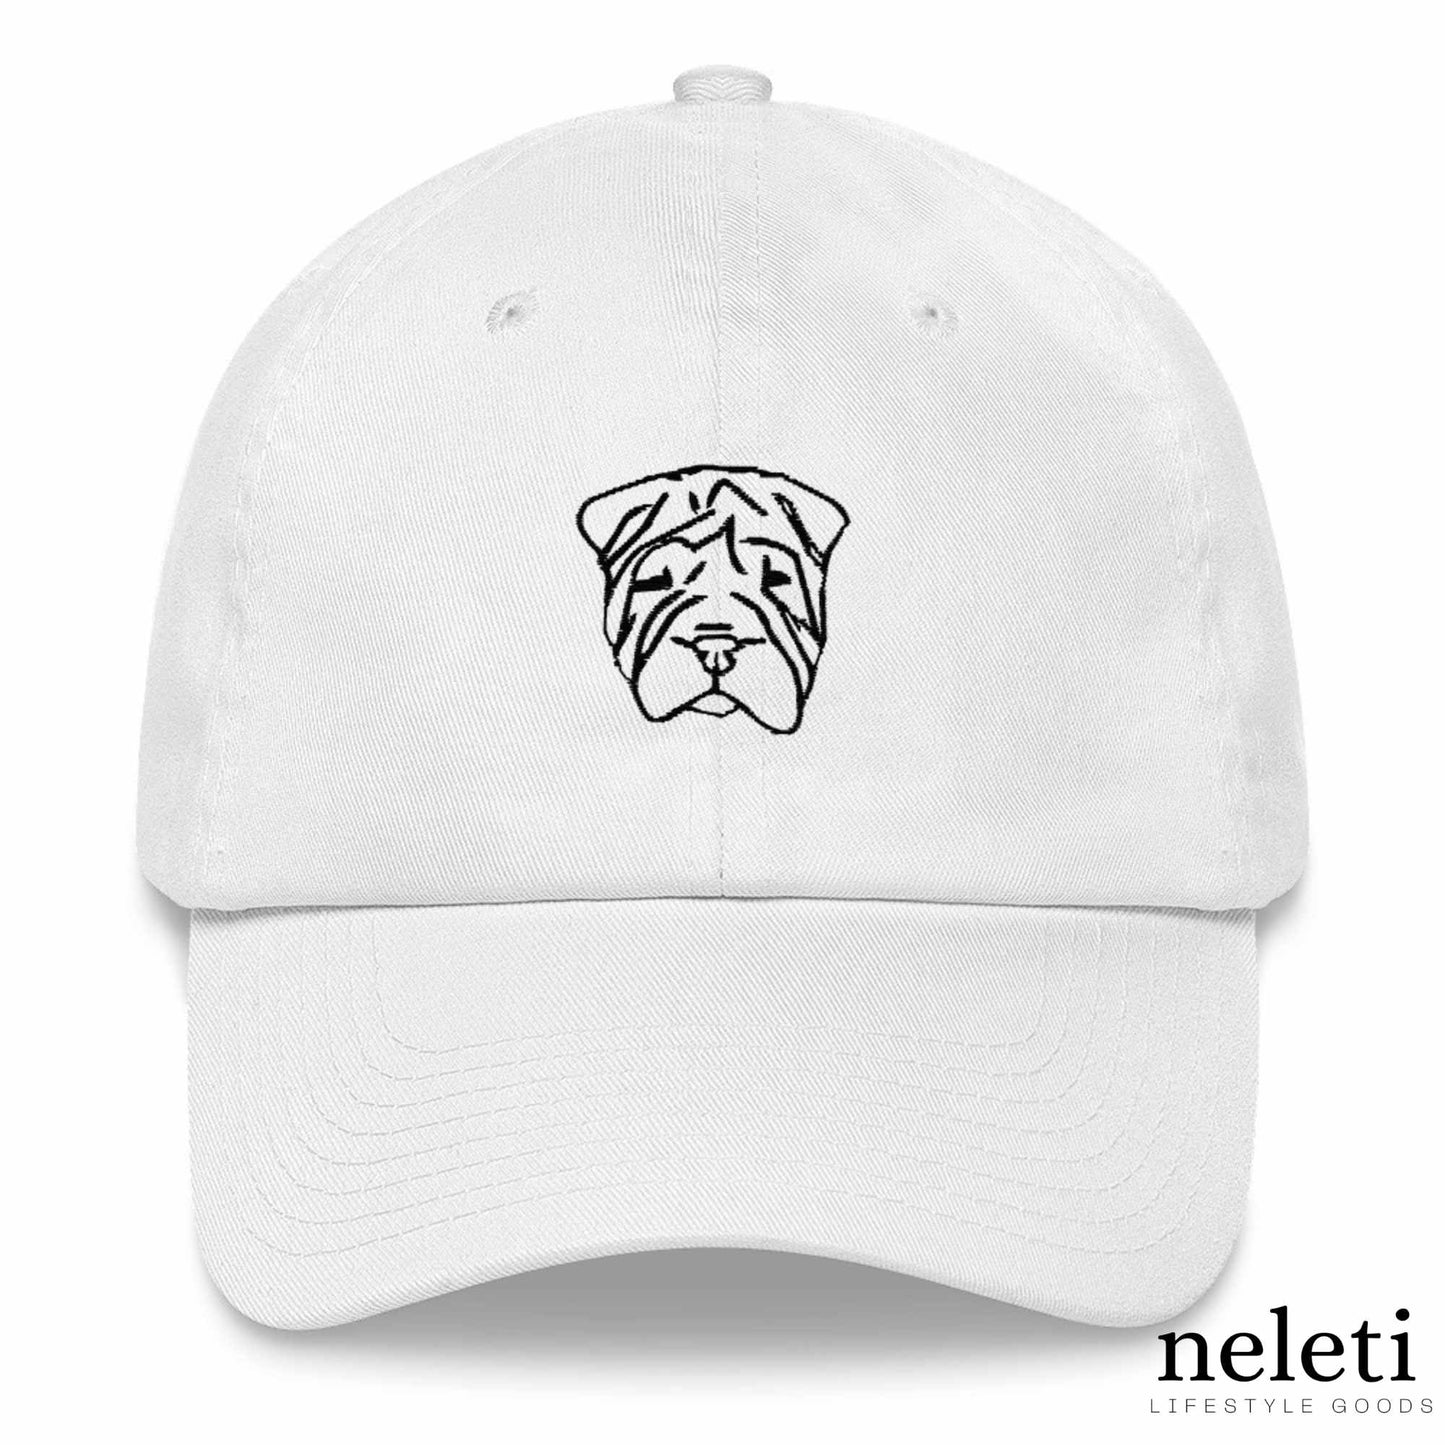 white-baseball-cap-with-embroidered-dog-face